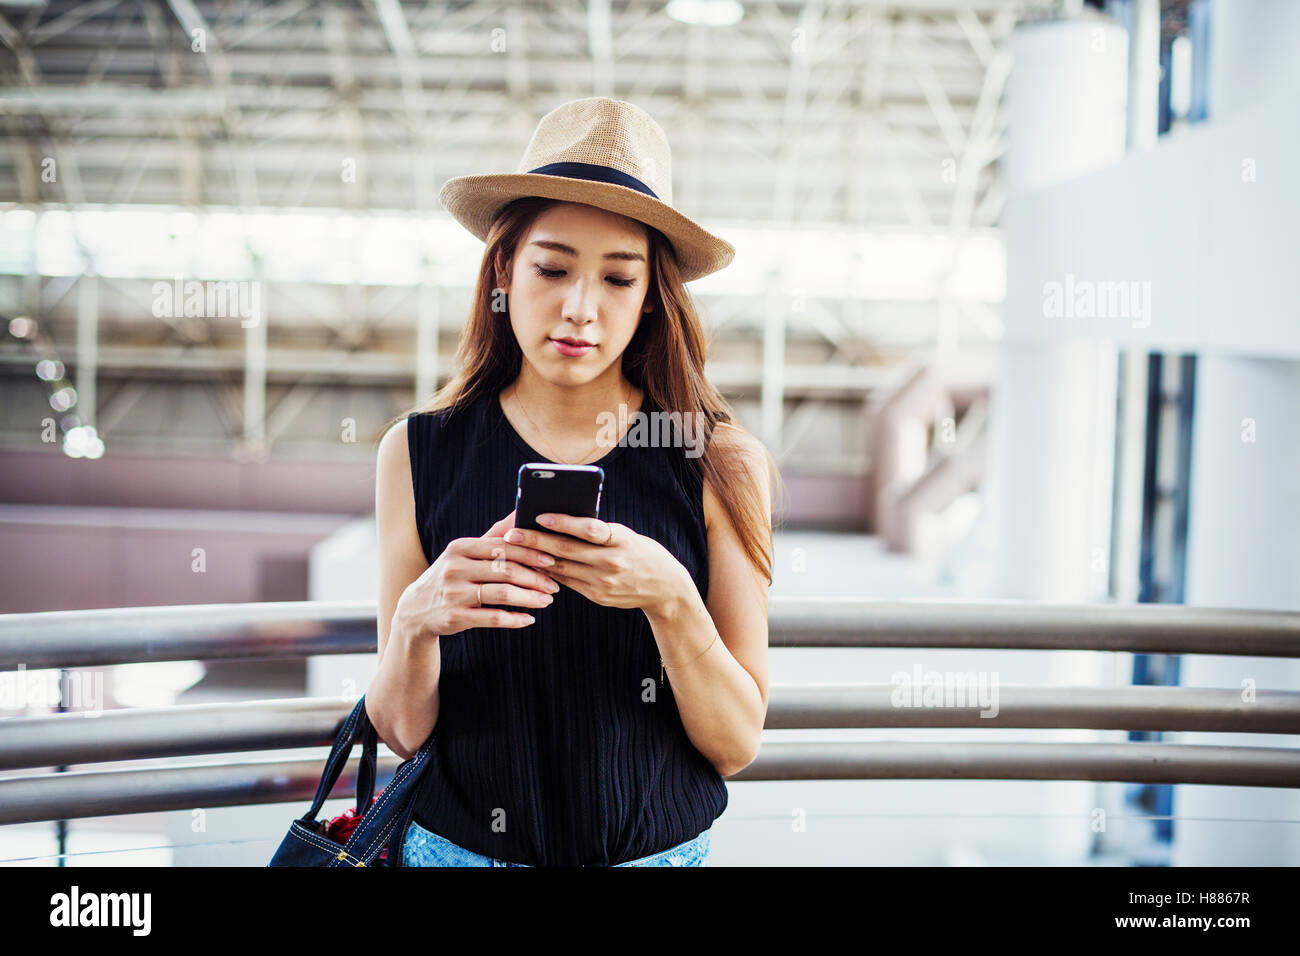 Young woman with long brown hair, wearing a Panama hat, in a shopping centre, using a mobile phone. Stock Photo